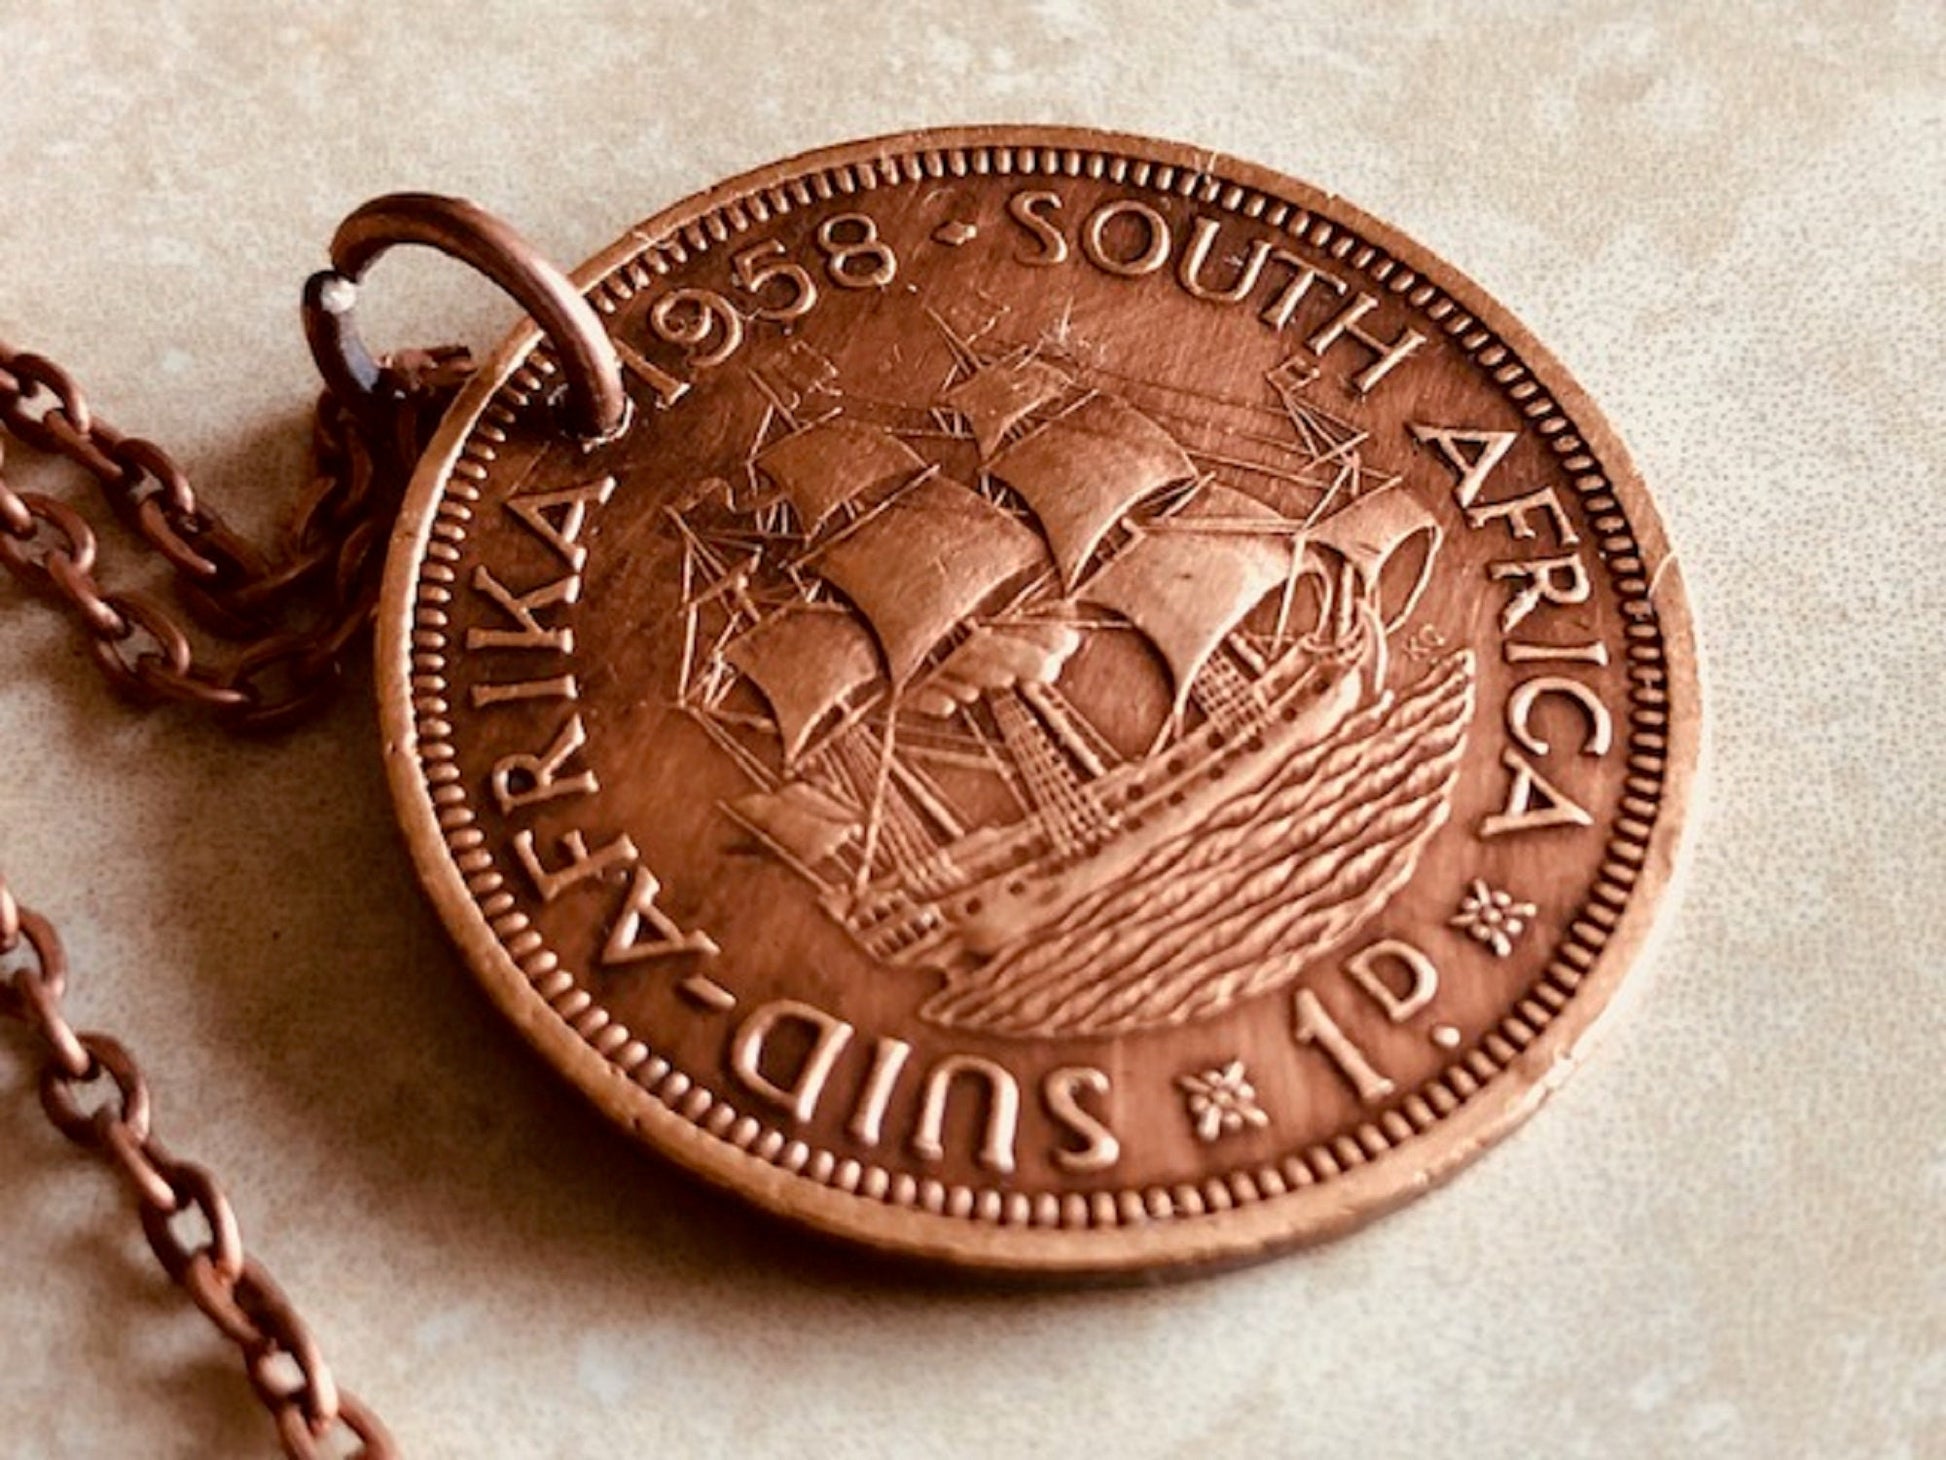 South Africa Coin Necklace Africka Pendant Personal Old Vintage Handmade Jewelry Gift Friend Charm For Him Her World Coin Collector